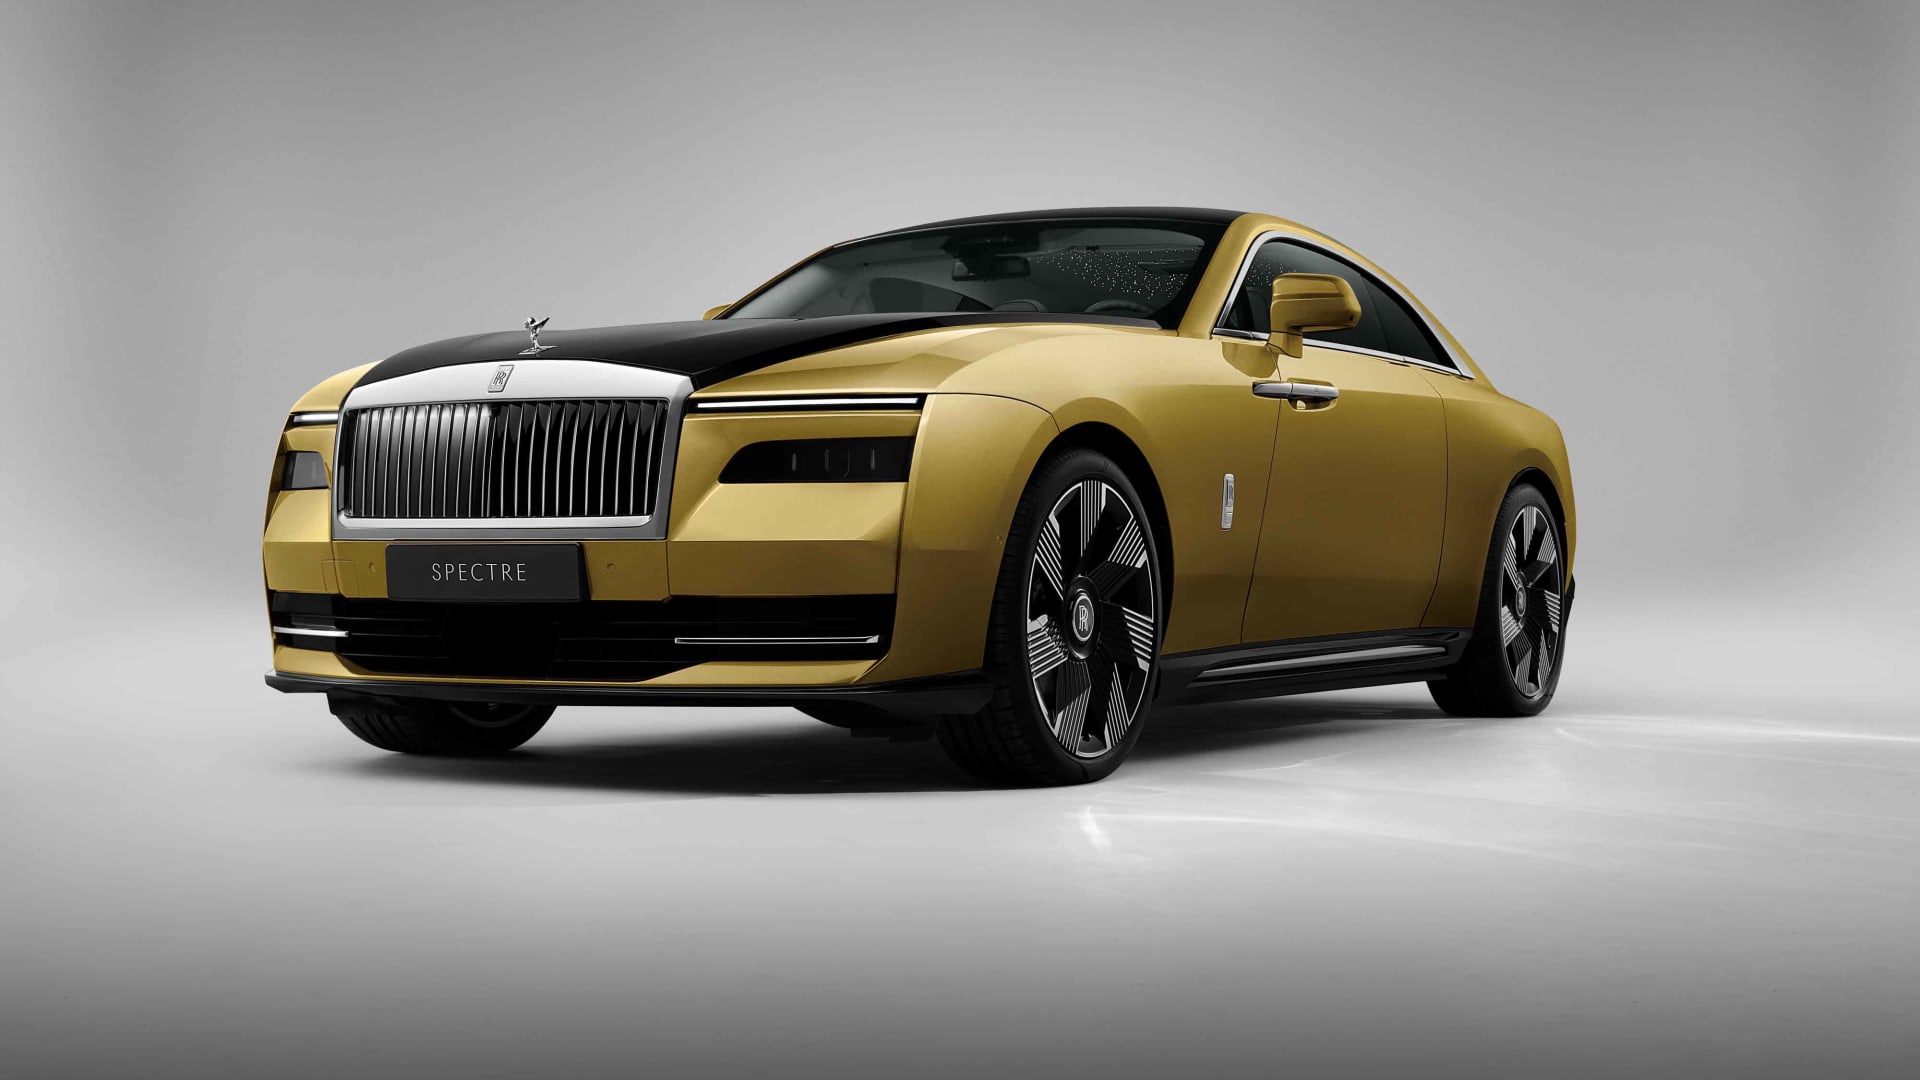 rolls-royce-says-it-already-has-hundreds-of-u-s-orders-for-its-usd413-000-spectre-electric-vehicle